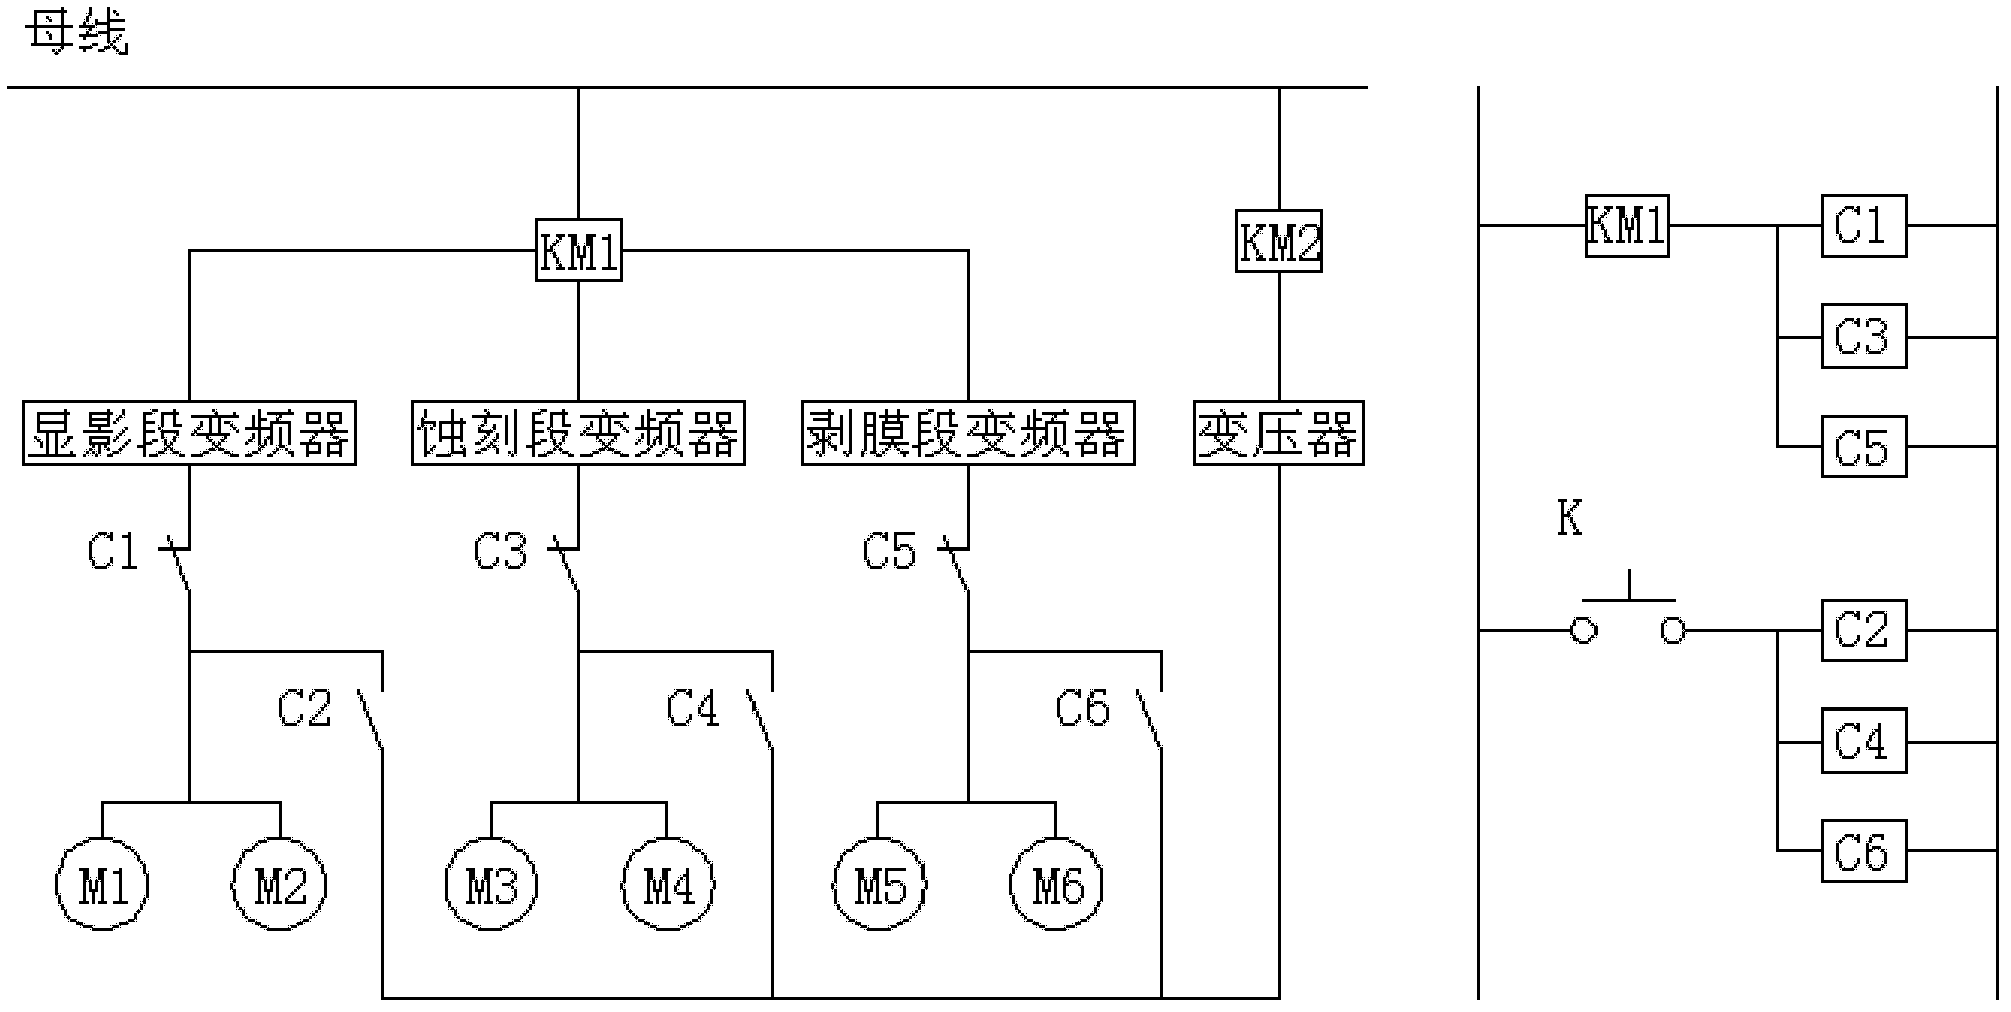 Urgent conveying reserved control system of producing wire body of high-density interconnection circuit board